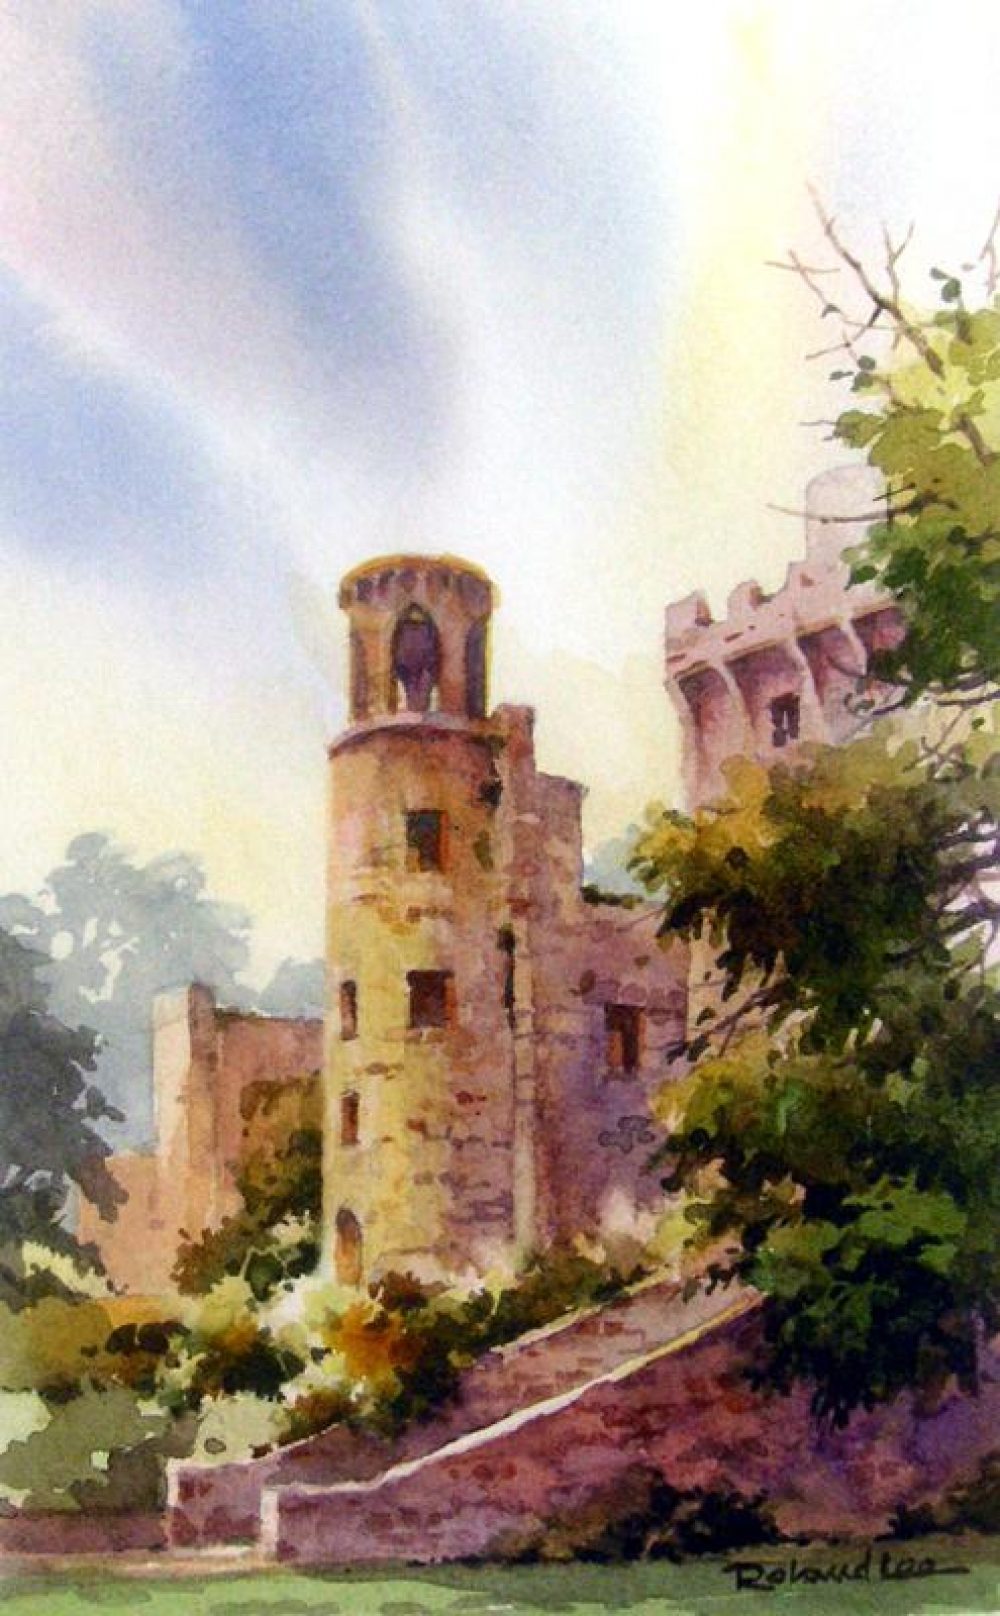 Tower at Blarney Castle Ireland - Original painting by Roland Lee of a the Blarney Castle in Cork Ireland